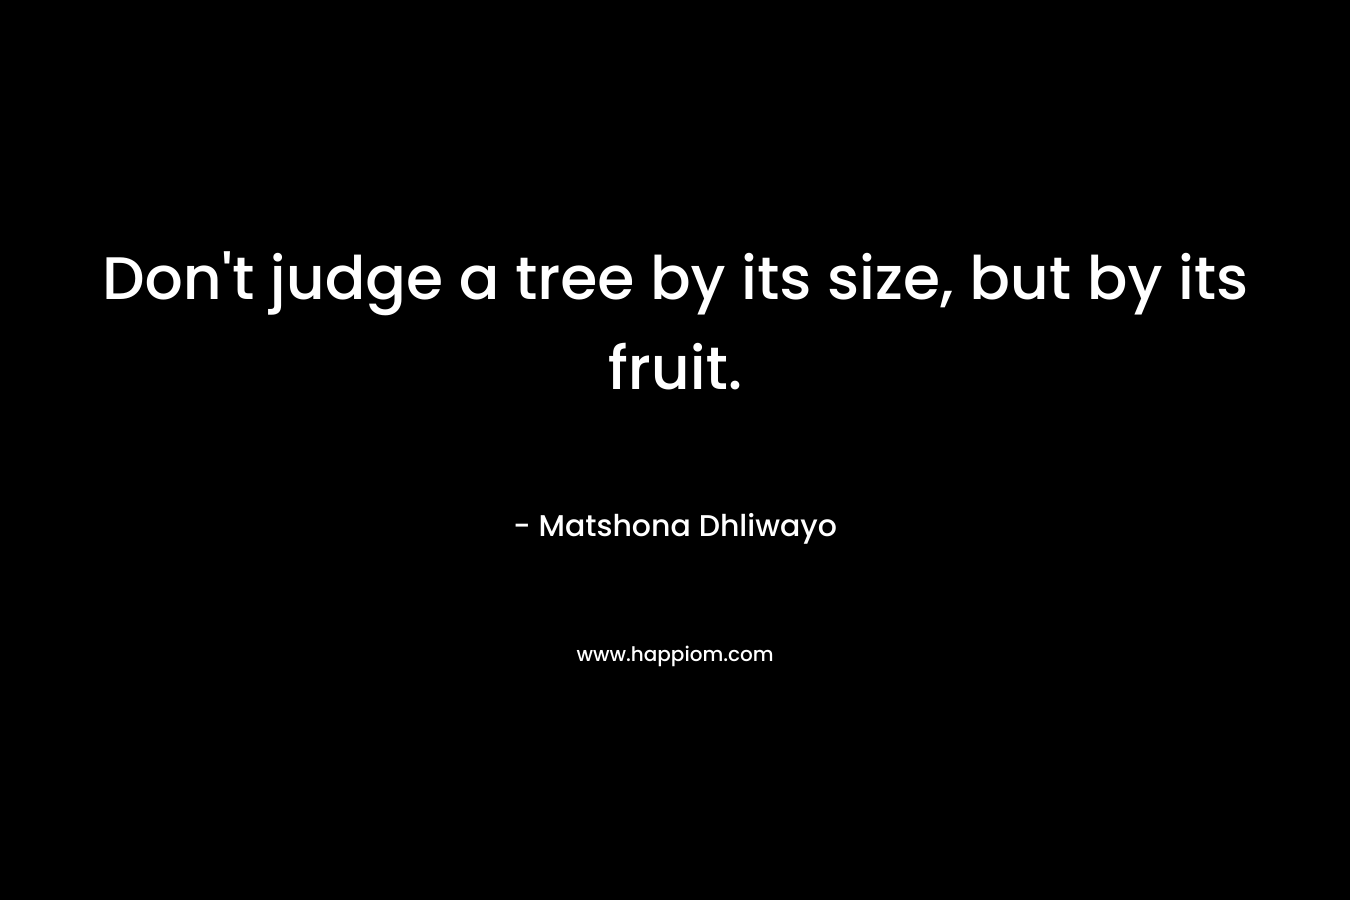 Don't judge a tree by its size, but by its fruit.